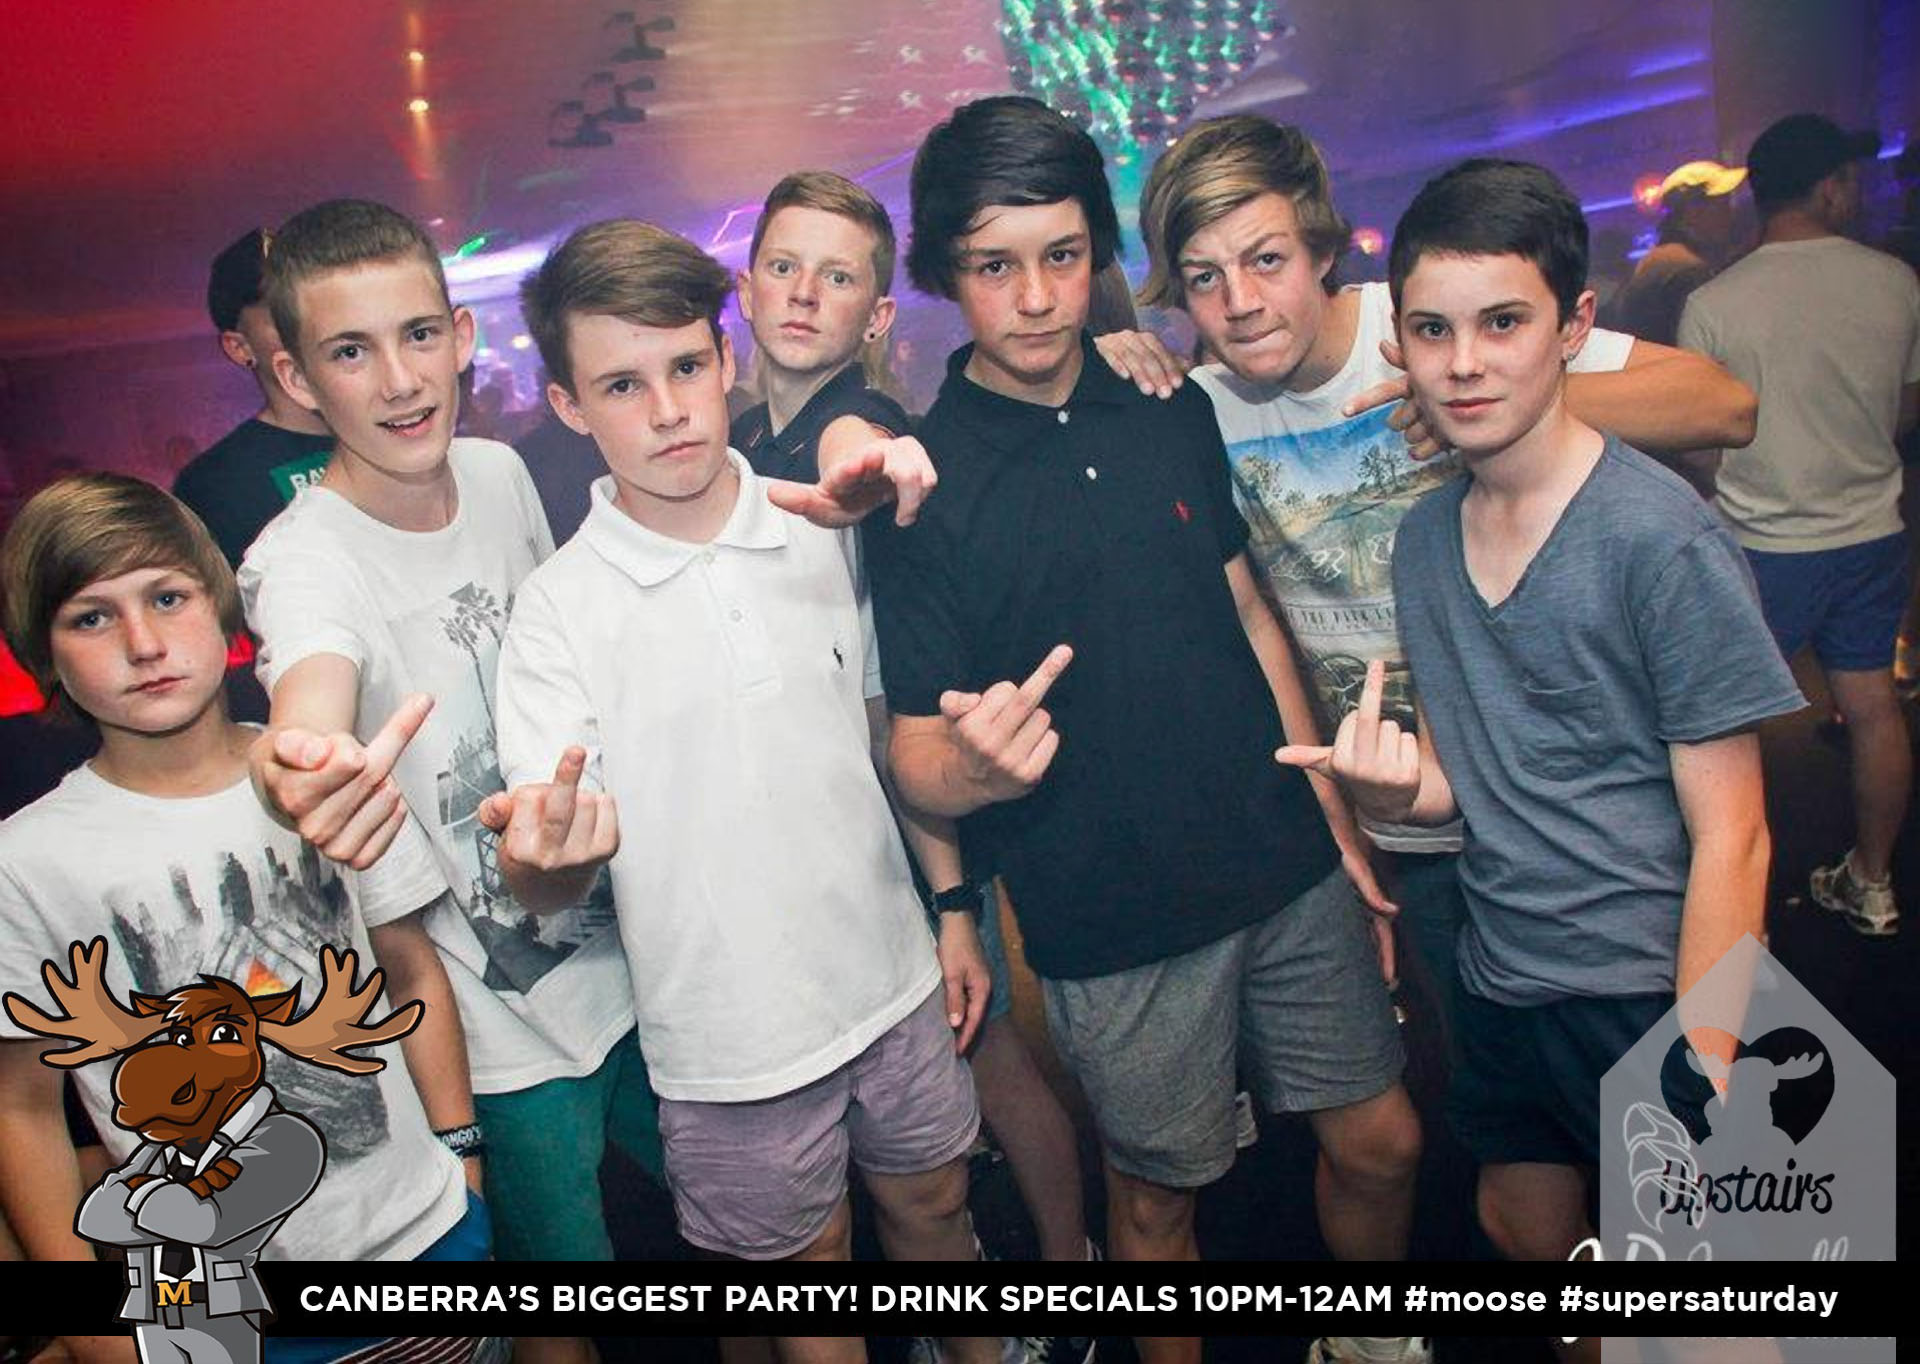 clubbing for teens